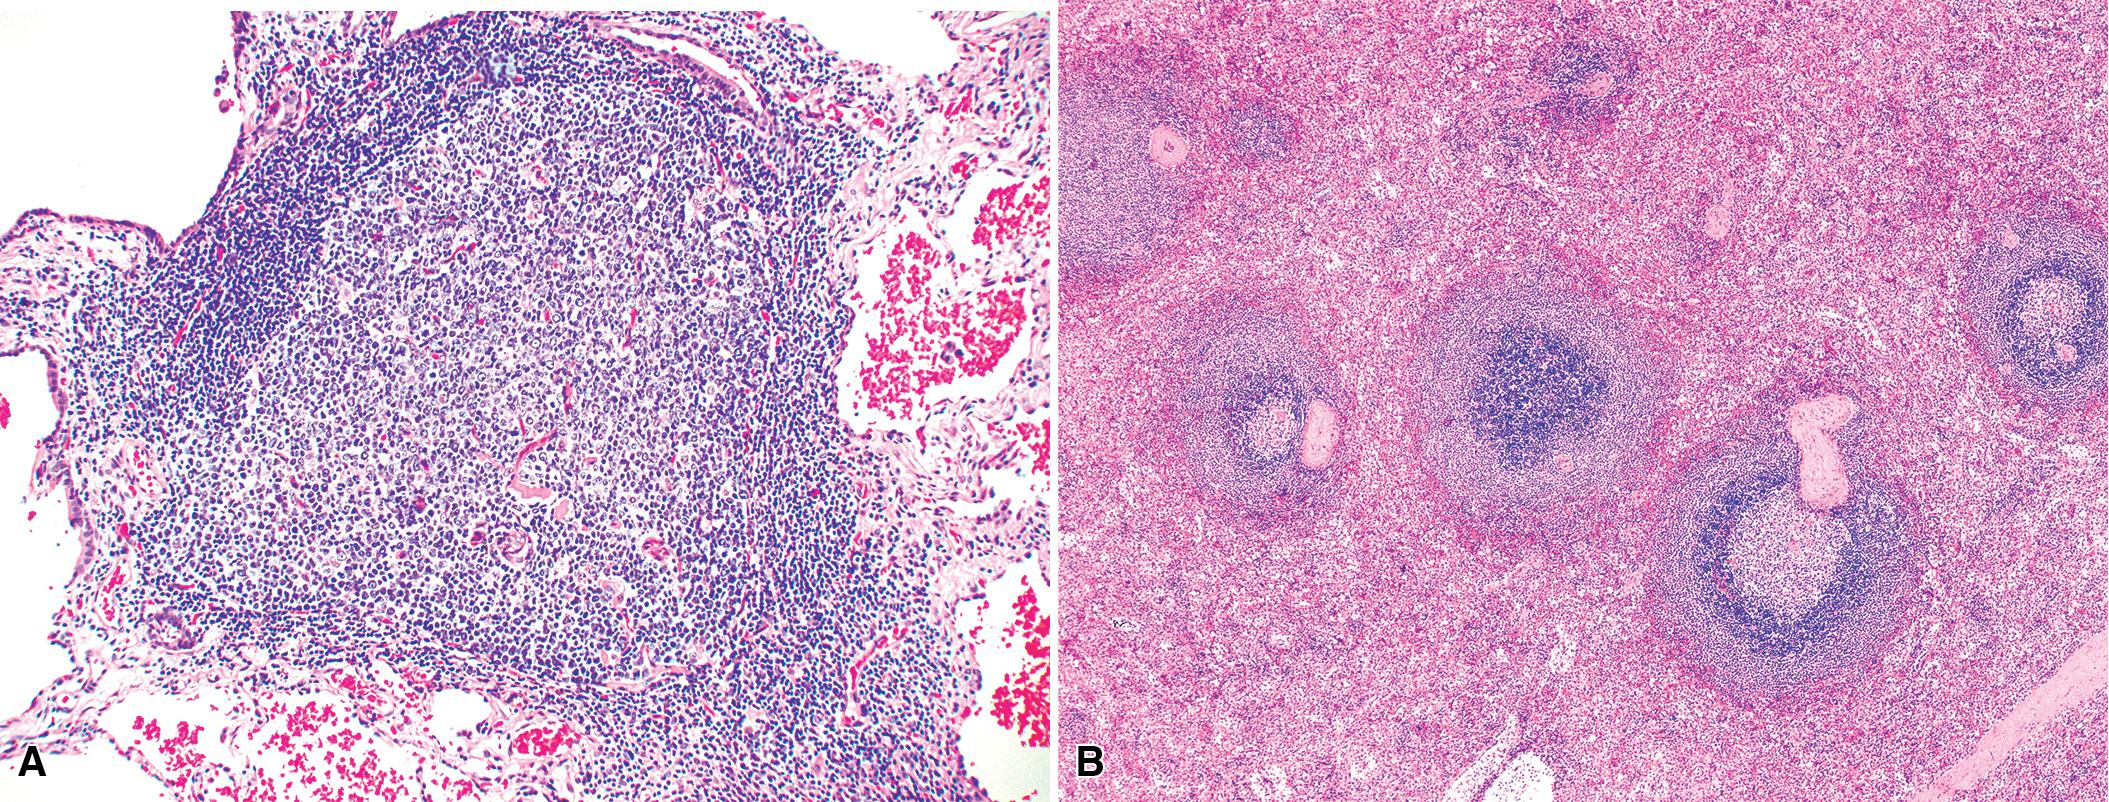 Figure 16.1, (A) Benign mucosa-associated lymphoid tissue accumulates adjacent to the airways after exposure to immunogenic material. The proliferation represents a mixture of B and T lineage lymphocytes, with a structure that loosely recapitulates germinal centers. The marginal zone is seldom so well developed as it is in the spleen. (B) When it is developed, consideration should be given to an evolving lymphoproliferative disorder.